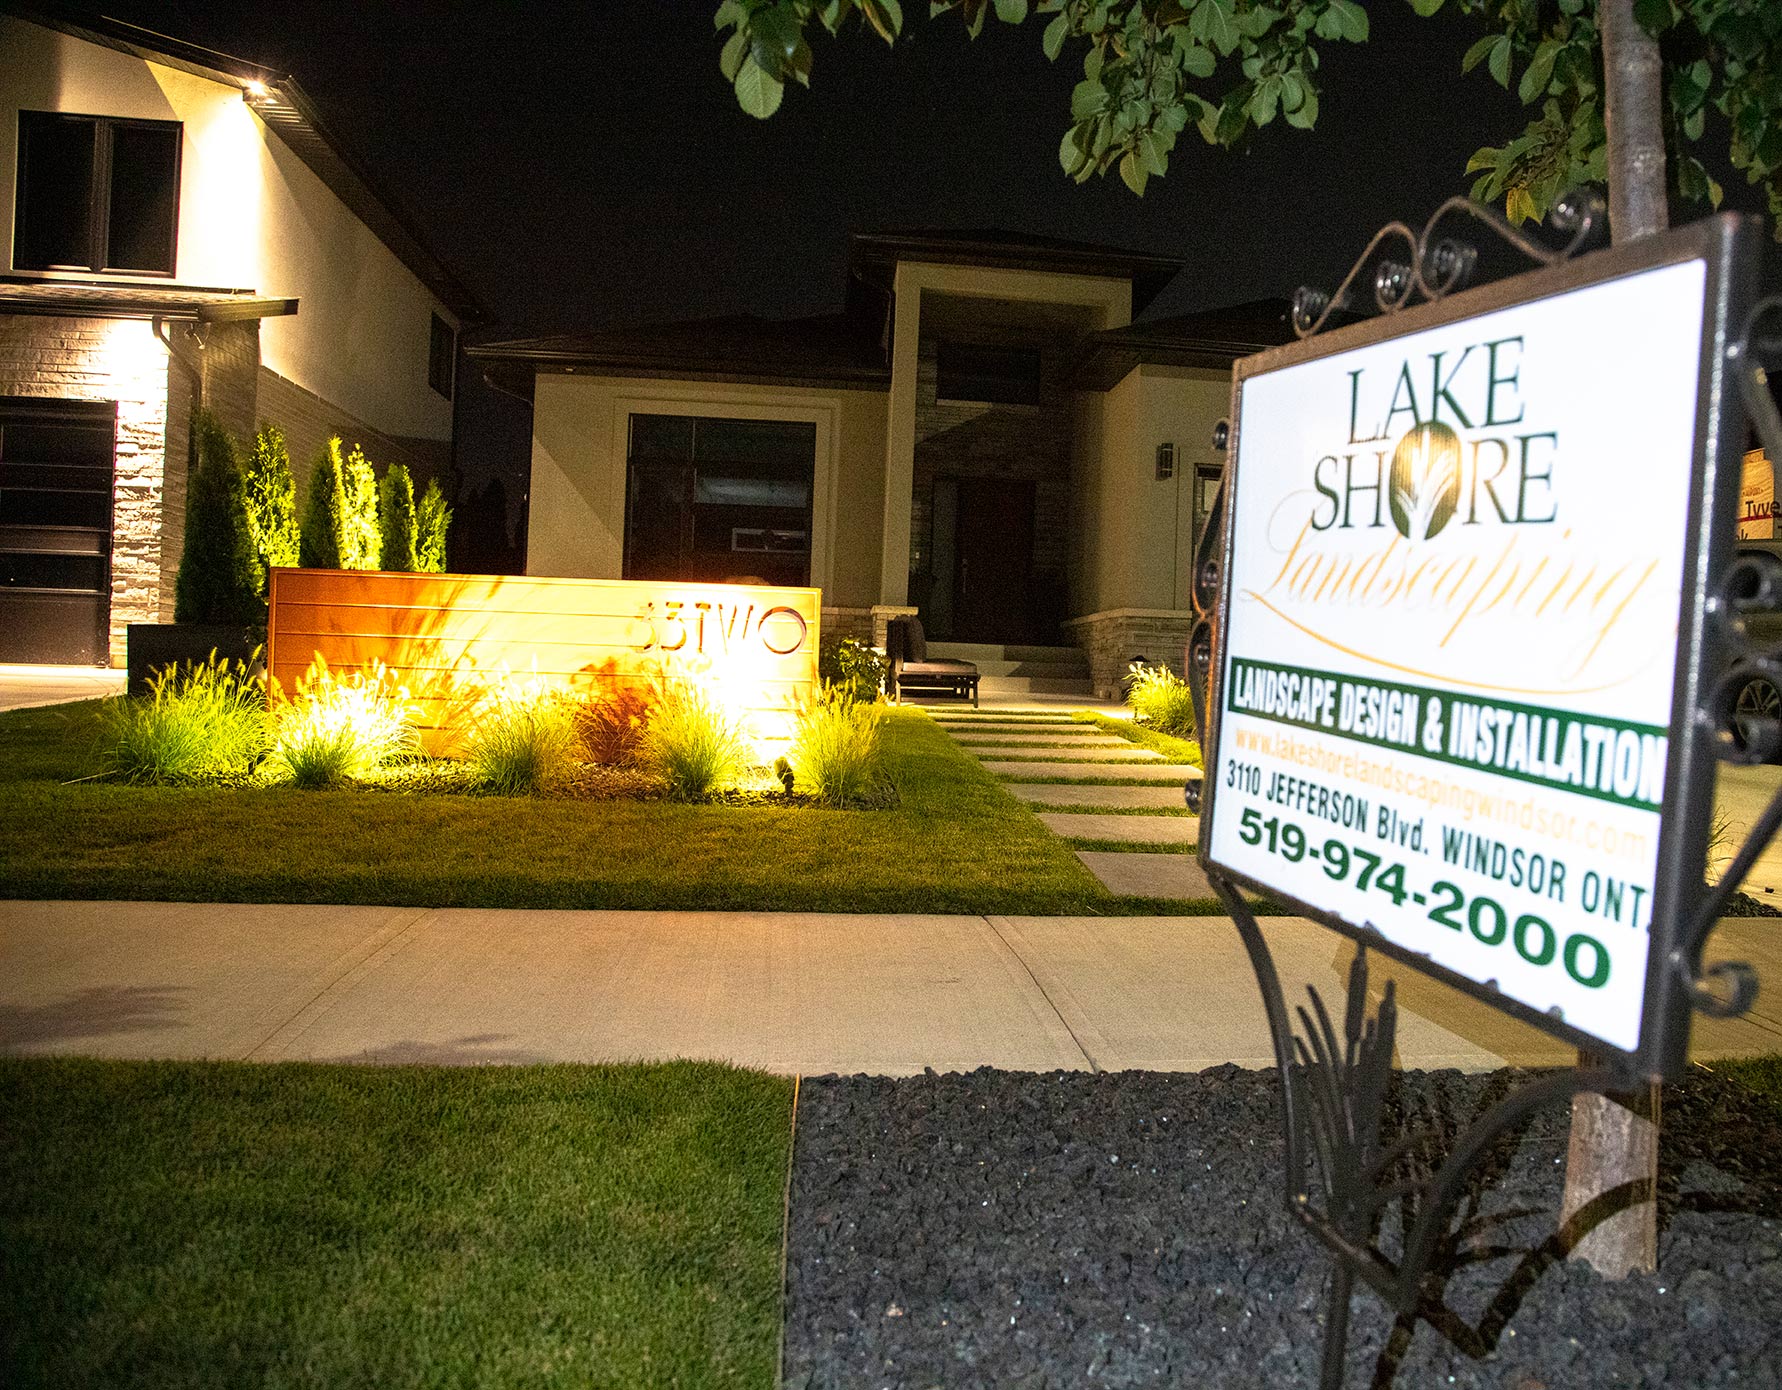 Outdoor lighting work with "lakeshore landscaping" sign in foreground.